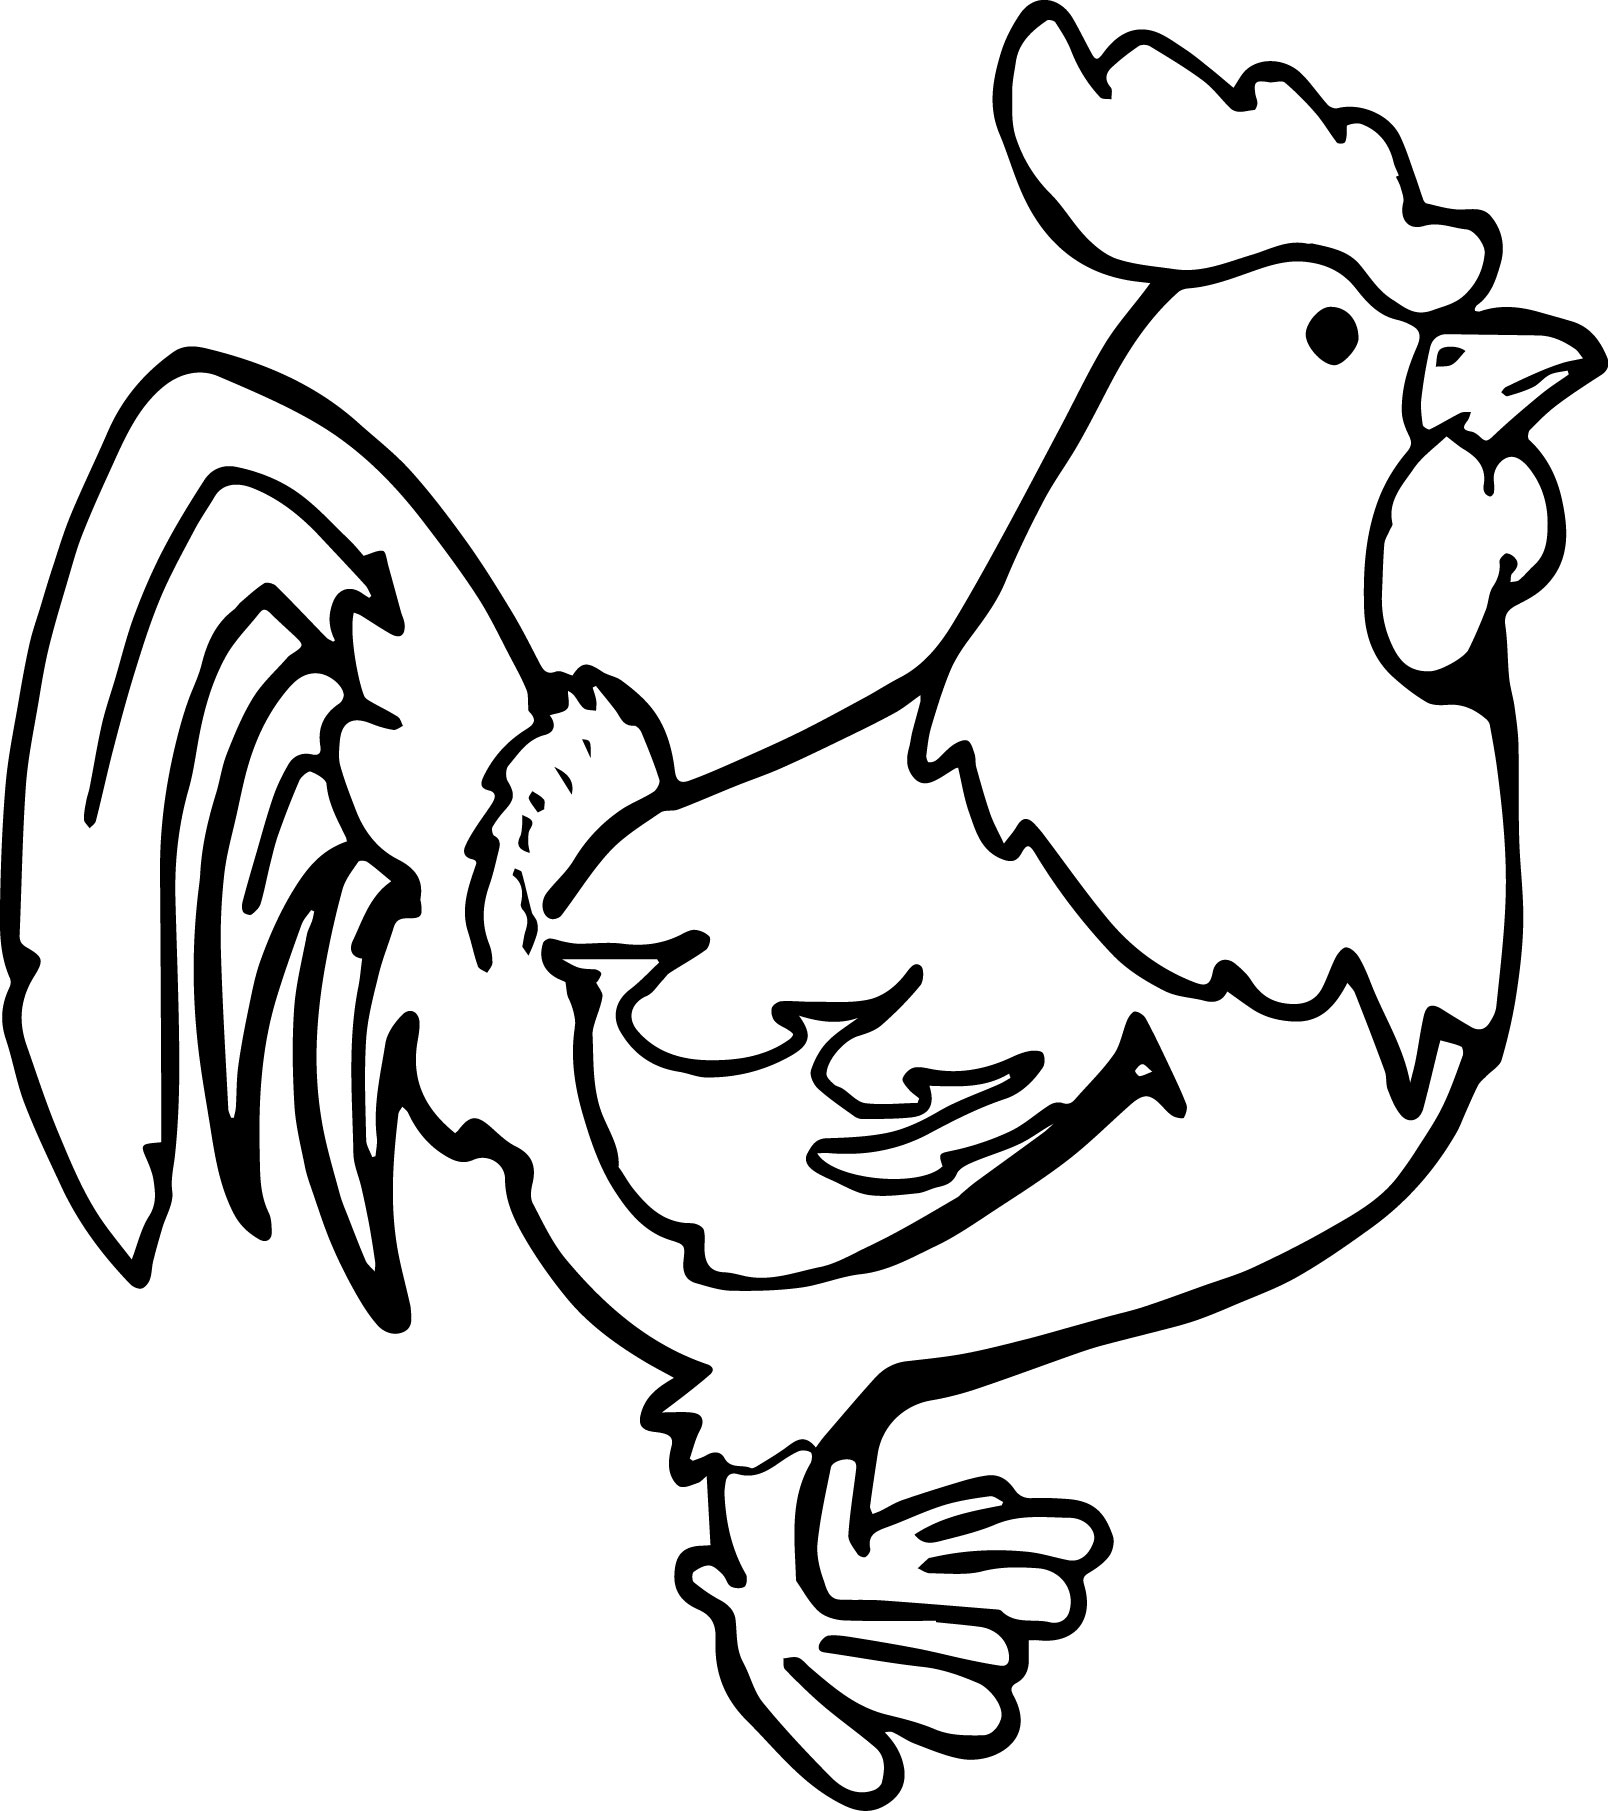 chicken-coloring-pages-best-coloring-pages-for-kids